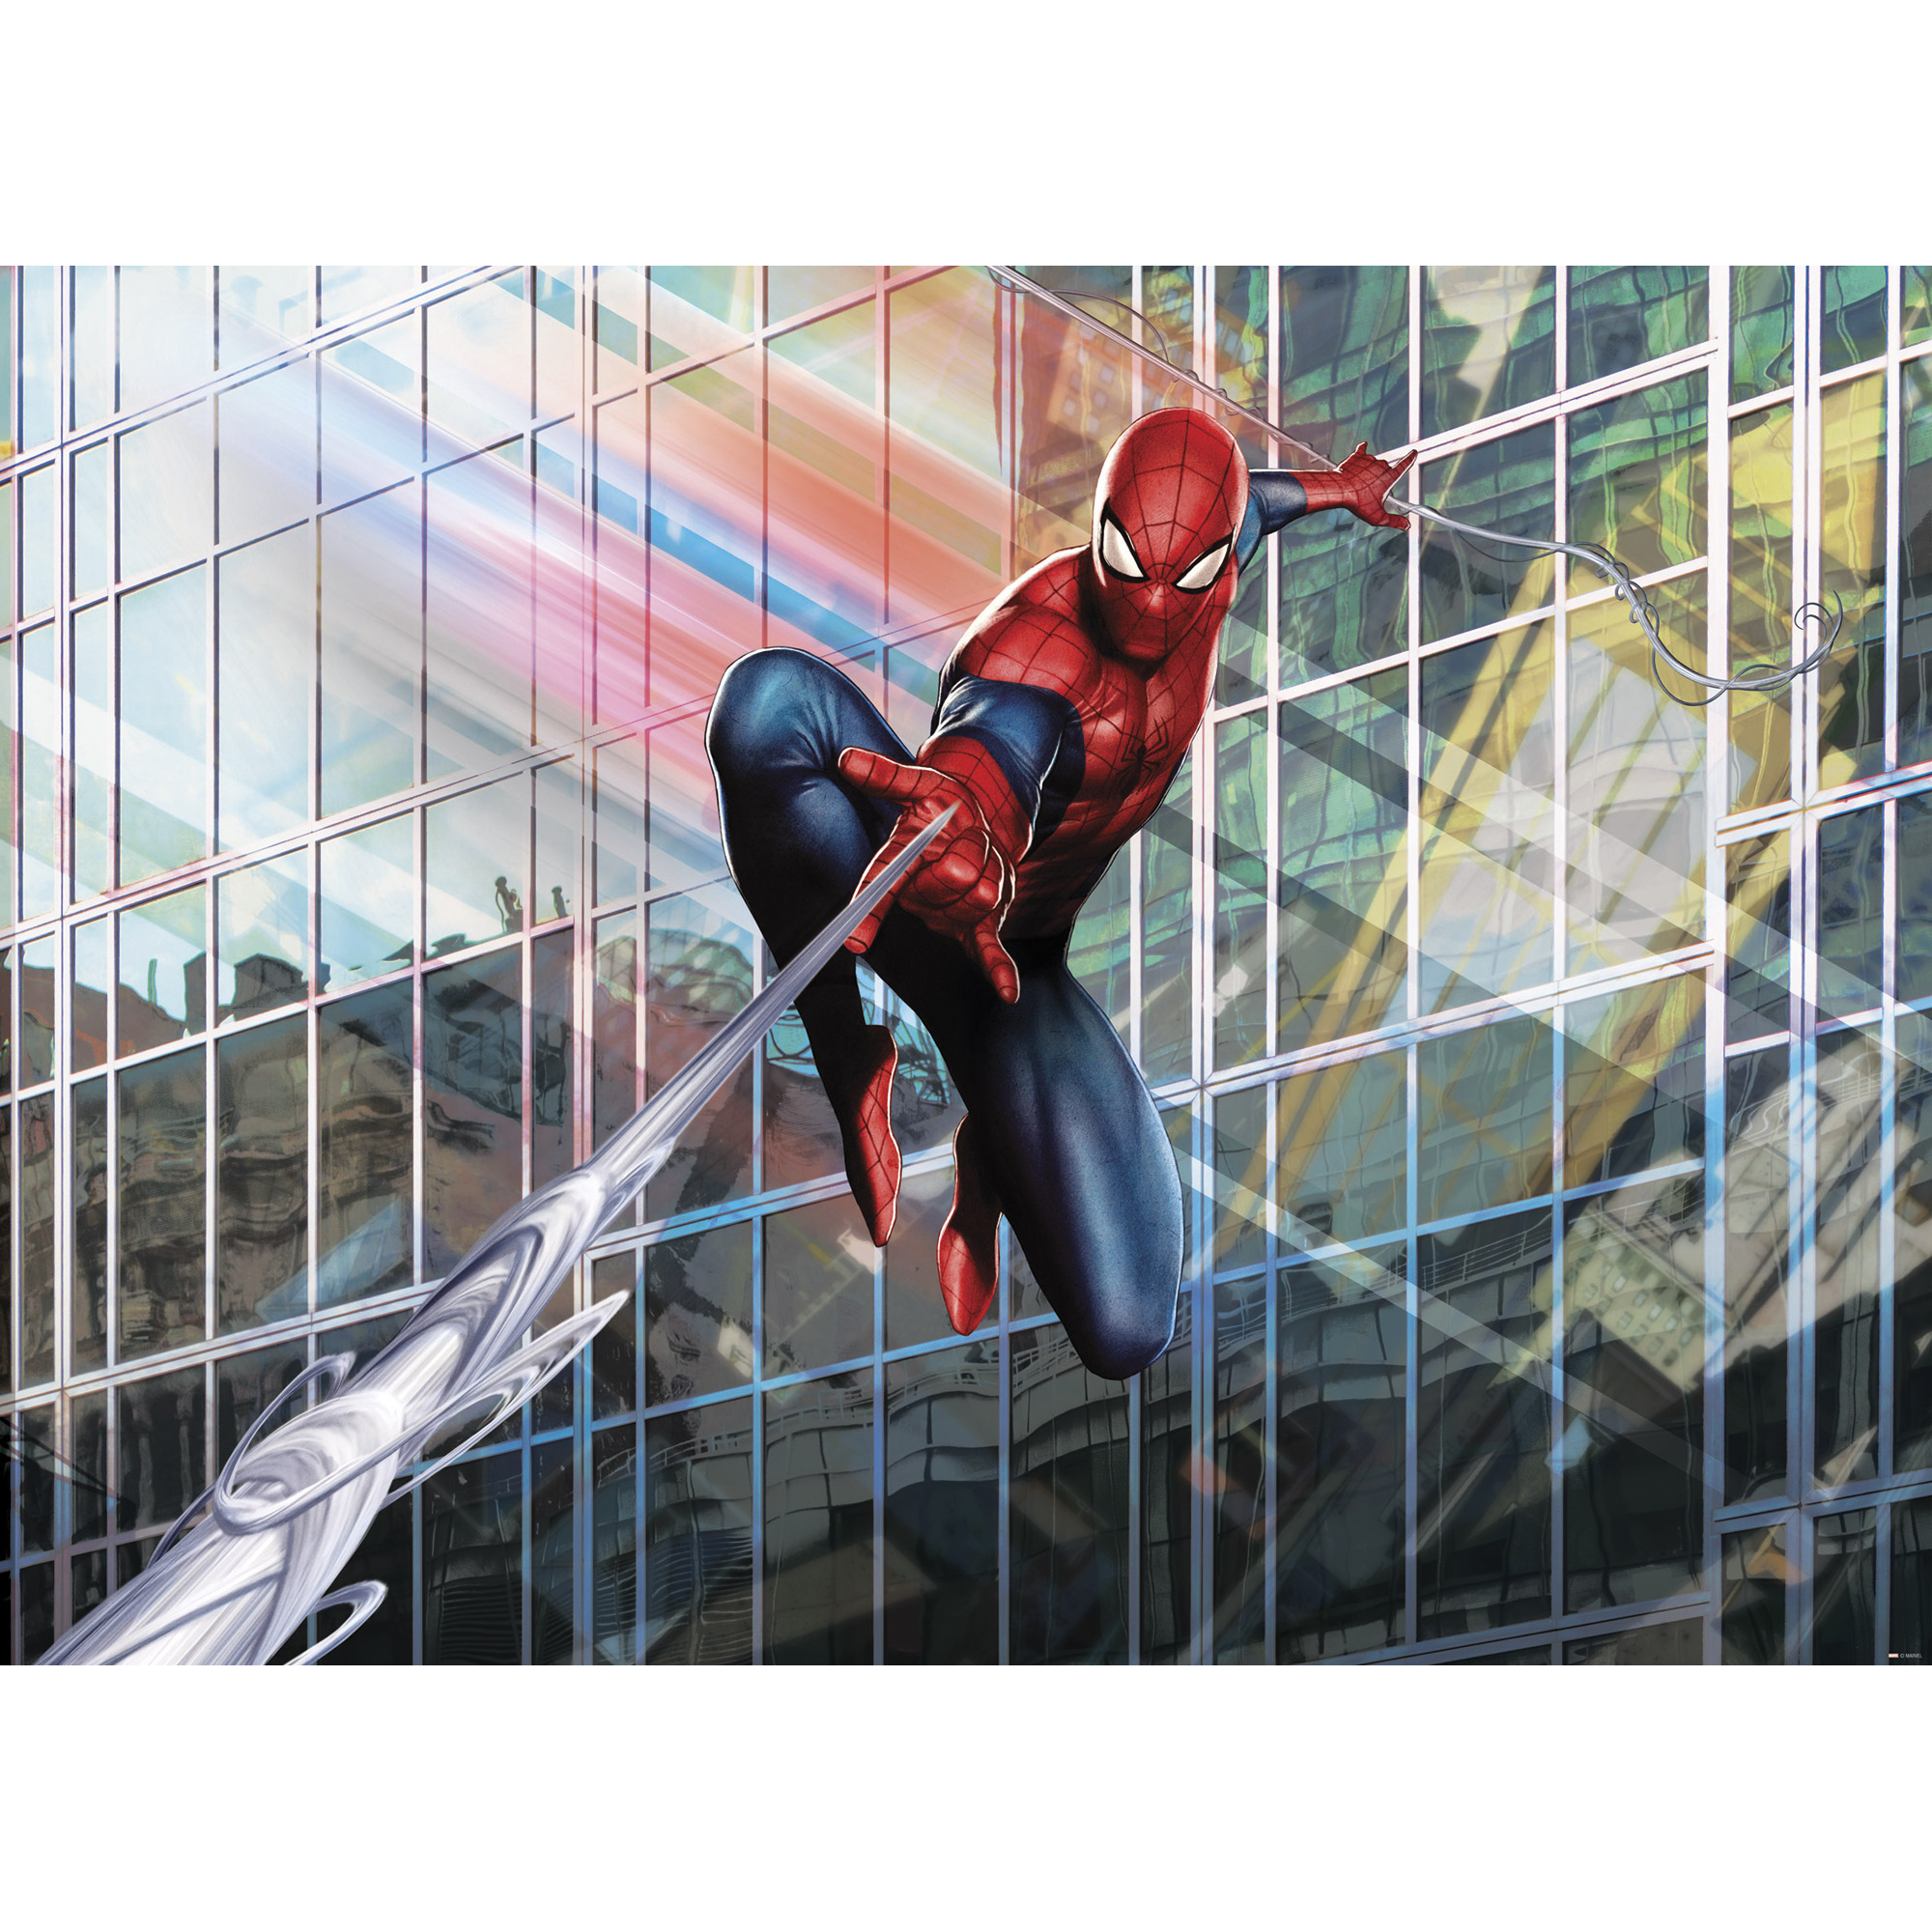 Fototapete 'Spider-Man Rush Hour' 184 x 254 cm + product picture